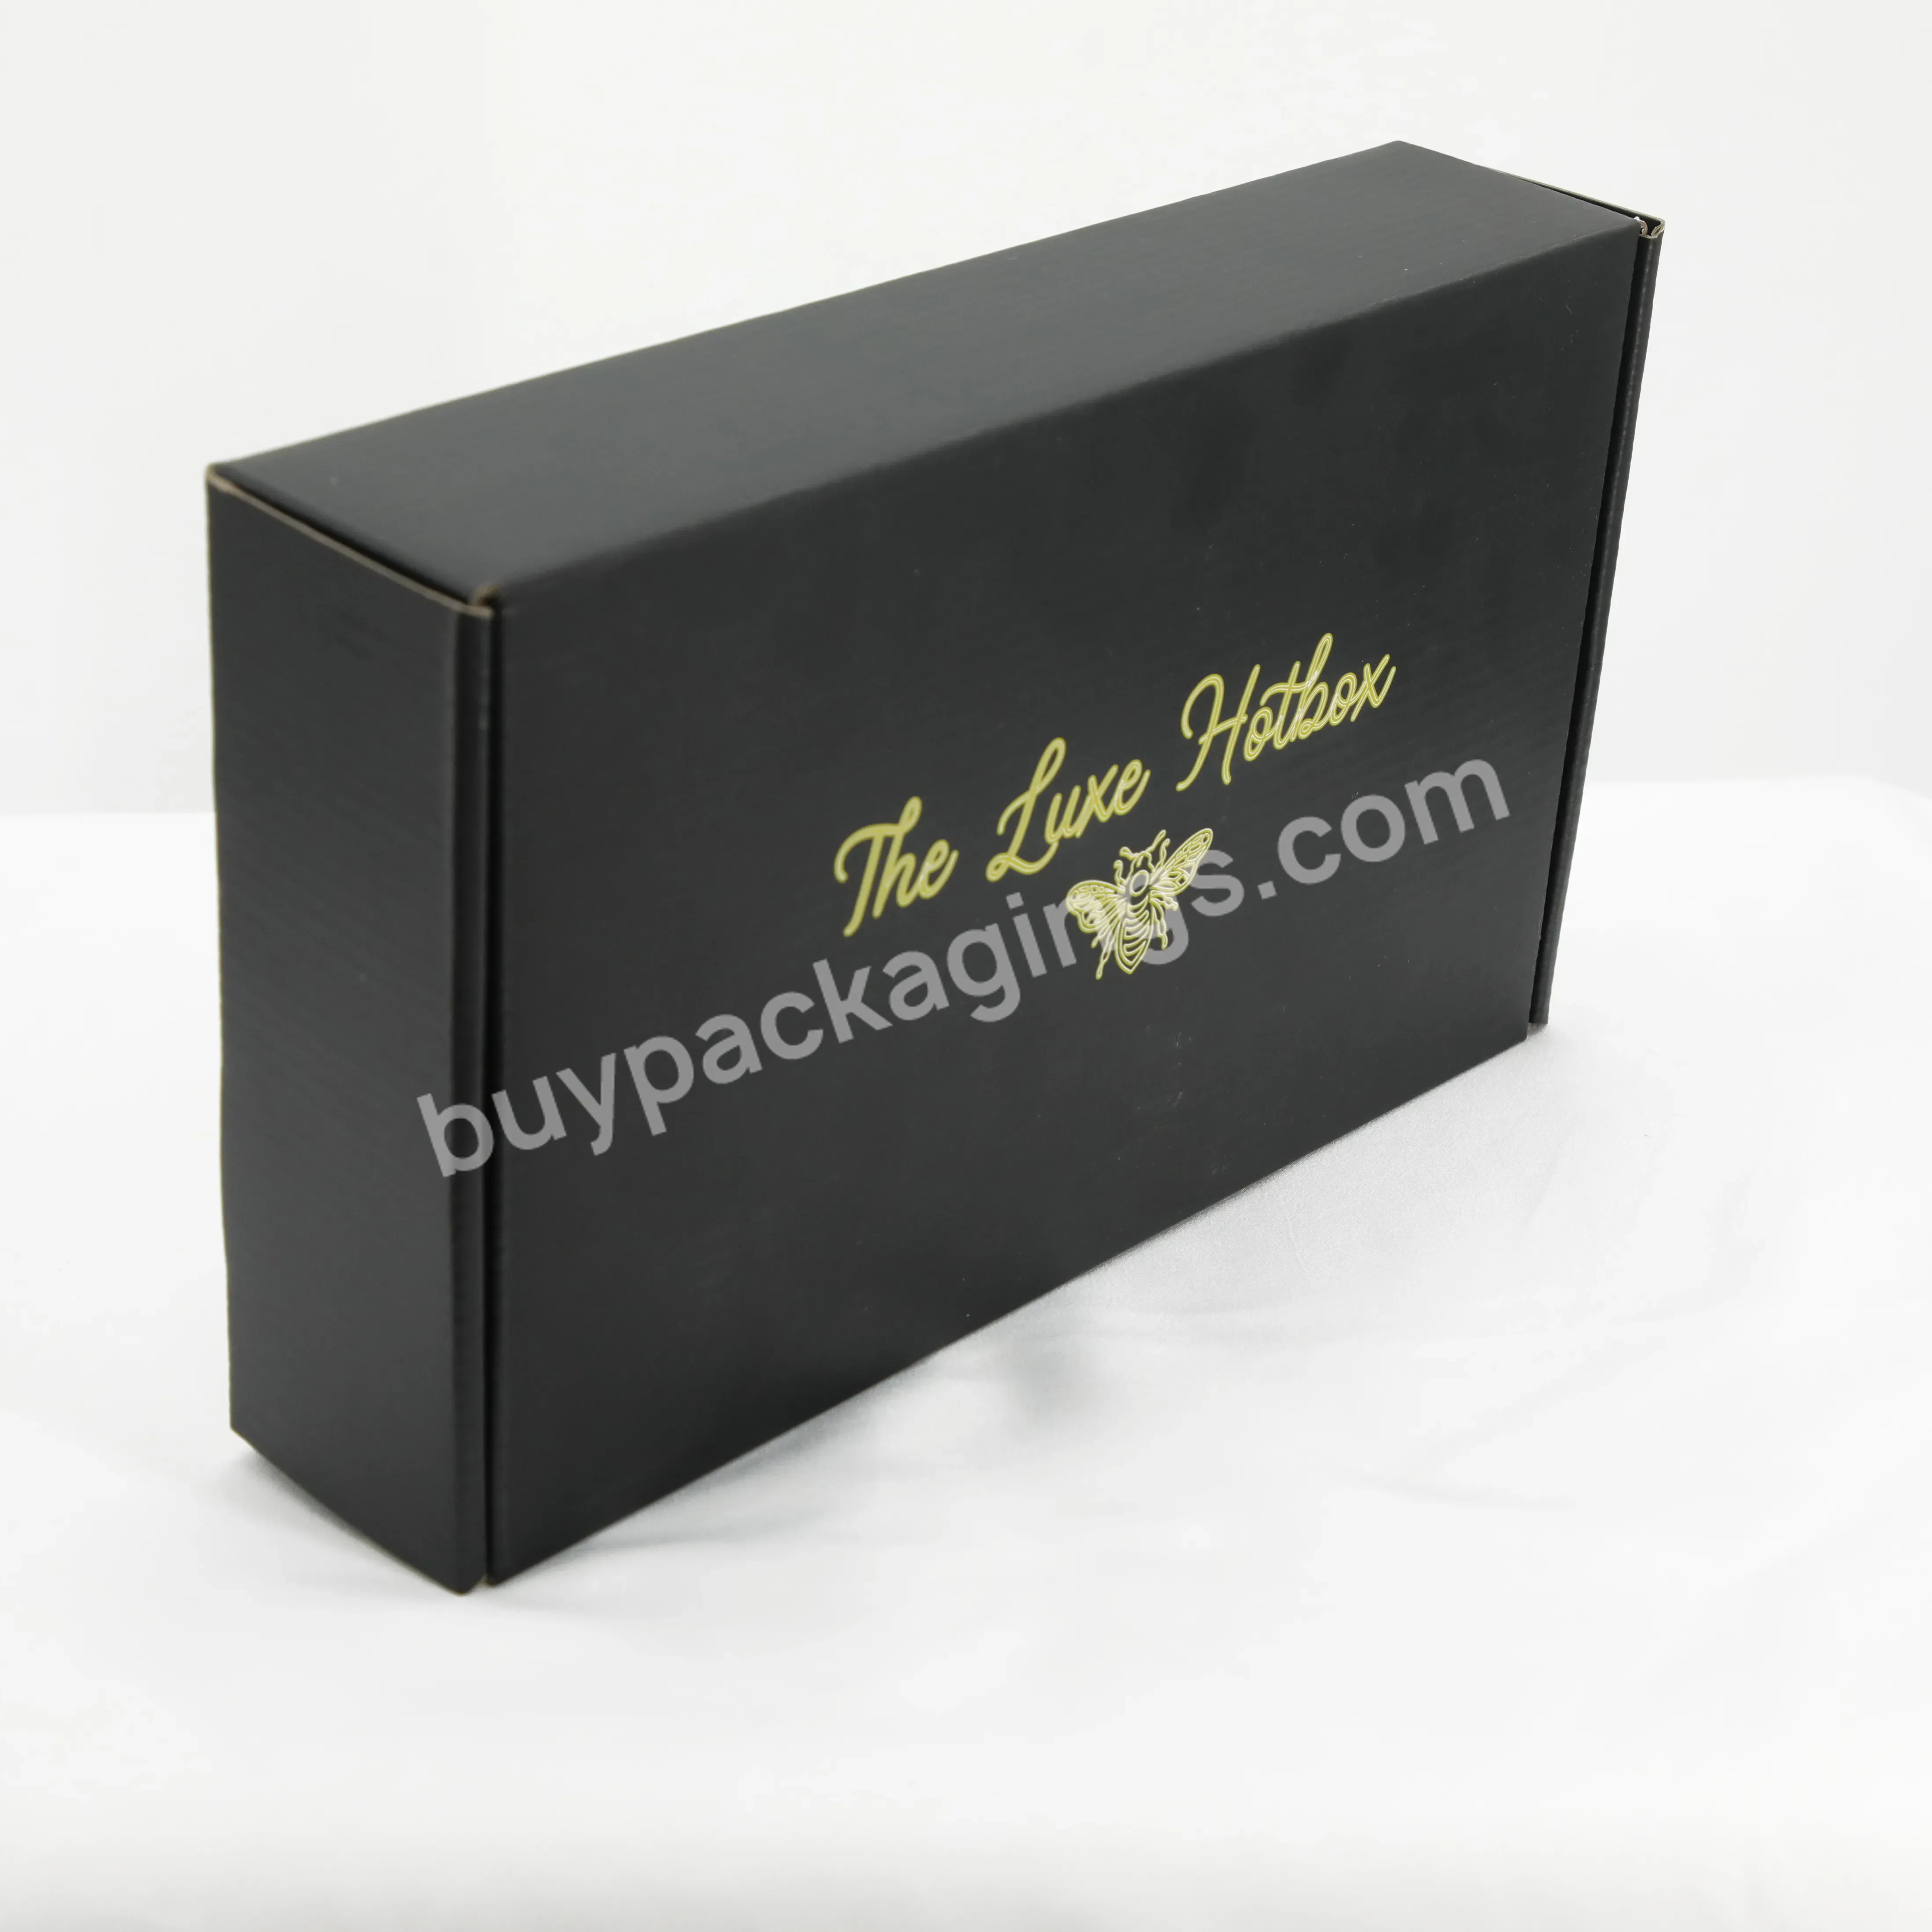 Shanghai Manufacture Customized Colored Corrugated Boxes With Custom Logo Printed,Durable Apparel Packaging Boxes For Cloth - Buy Tshirt Box T-shirt Packaging,Packaging Boxs For Tshirts,Clothes Packaging Custom Box Tshirt.